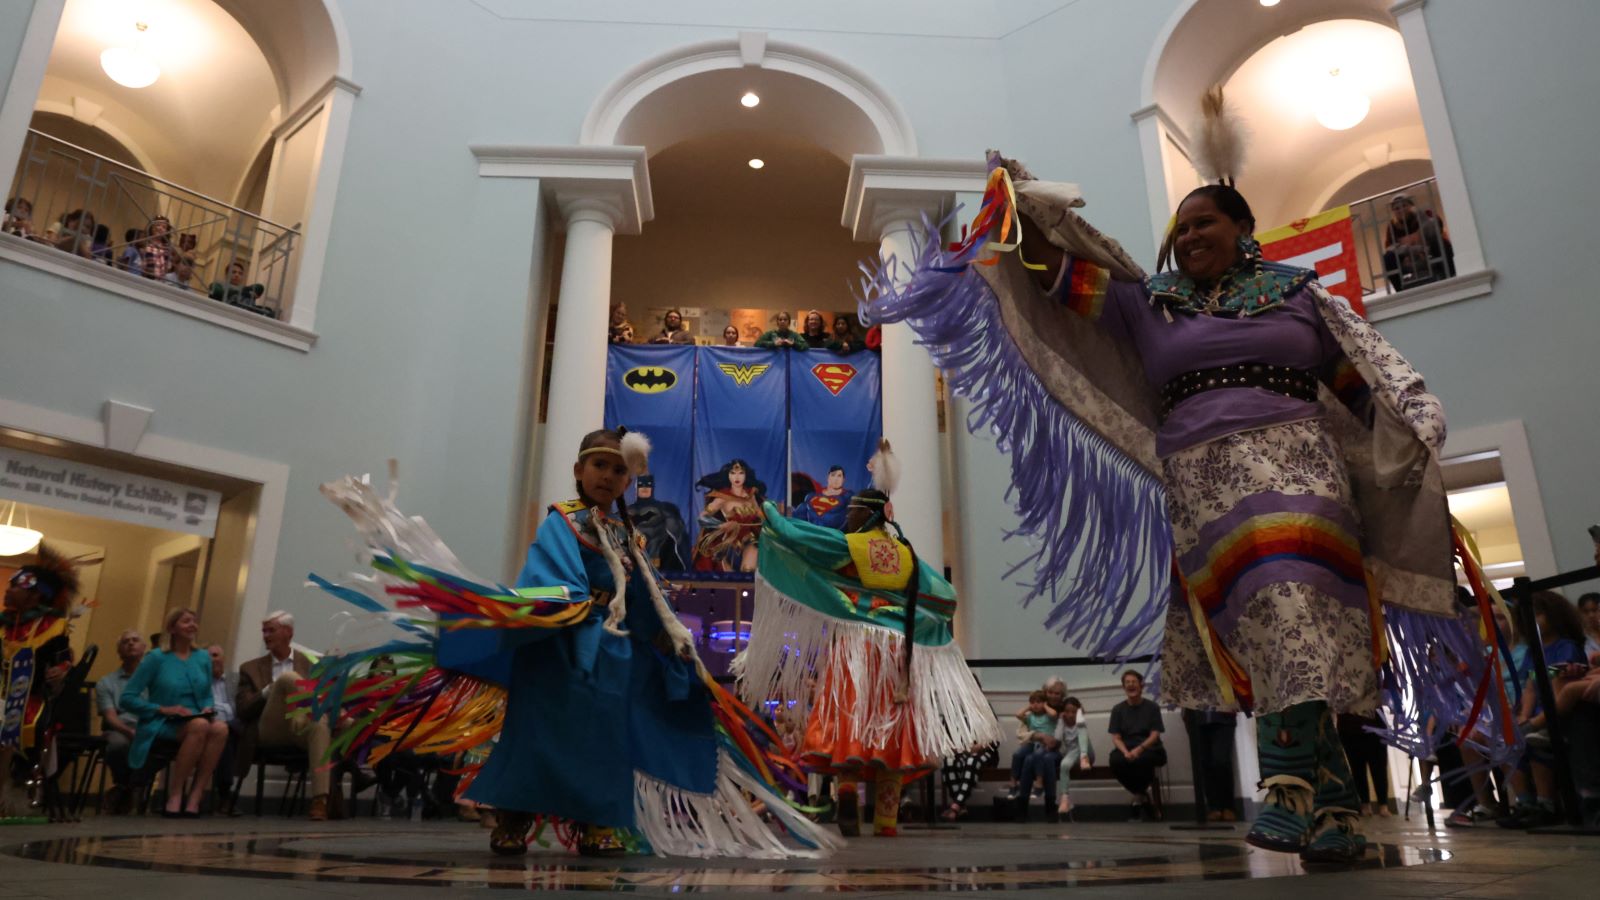 Members of Native American tribes perform traditional dances at the Mayborn Museum rotunda